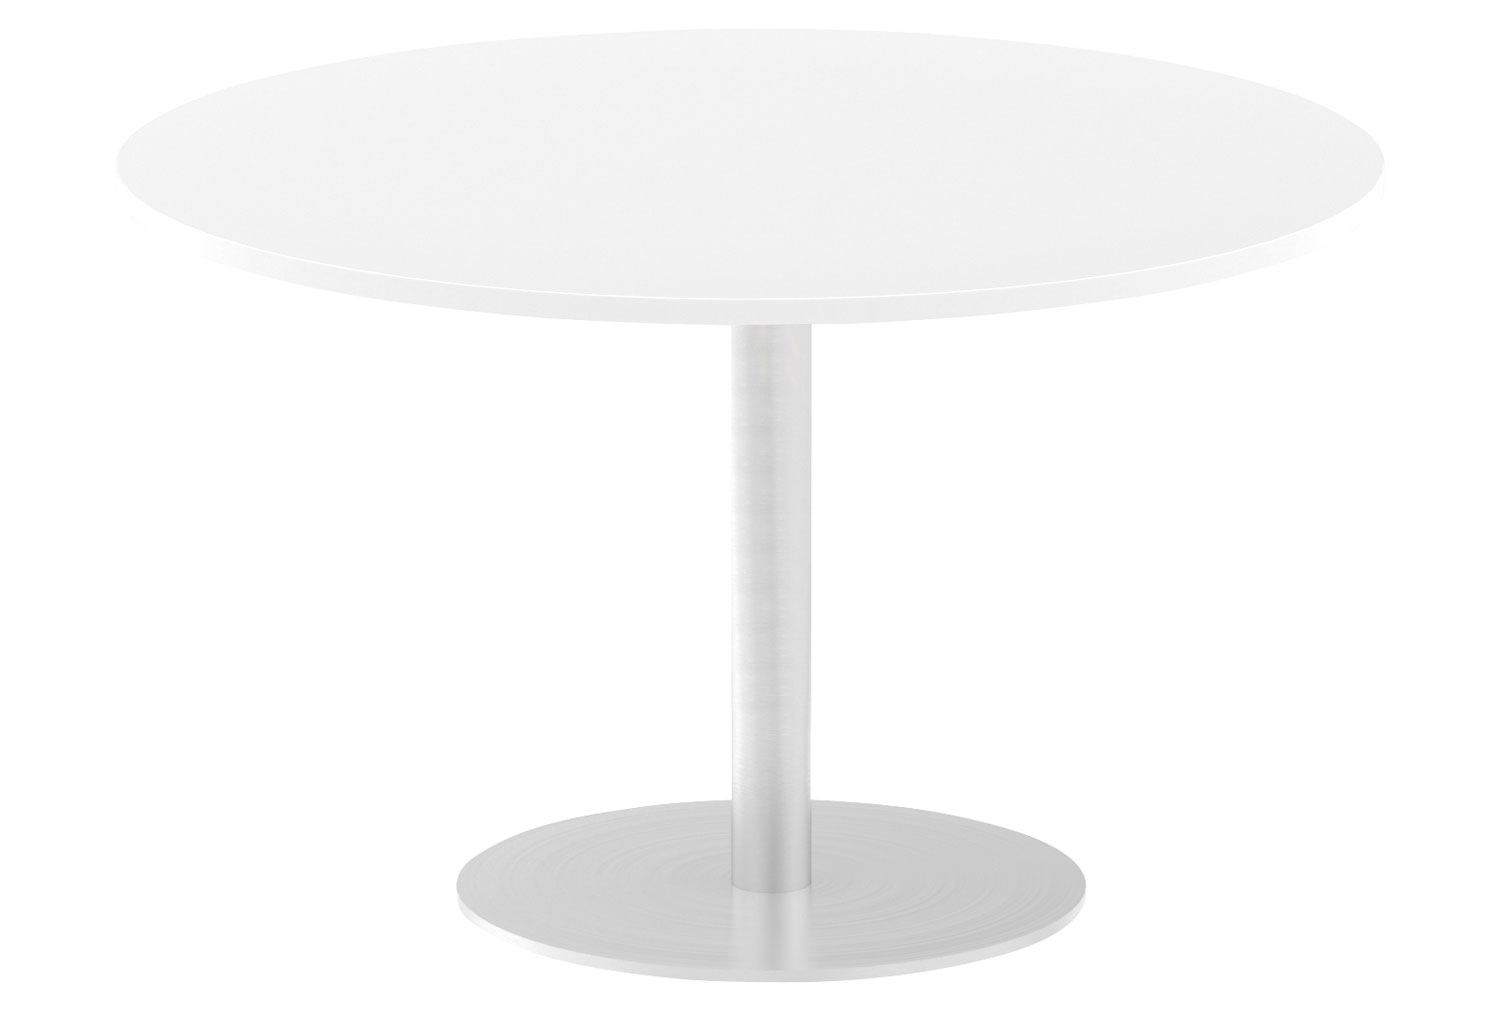 Vitali Radial Base Circular Dining Table, 100diax73h (cm), White, Express Delivery